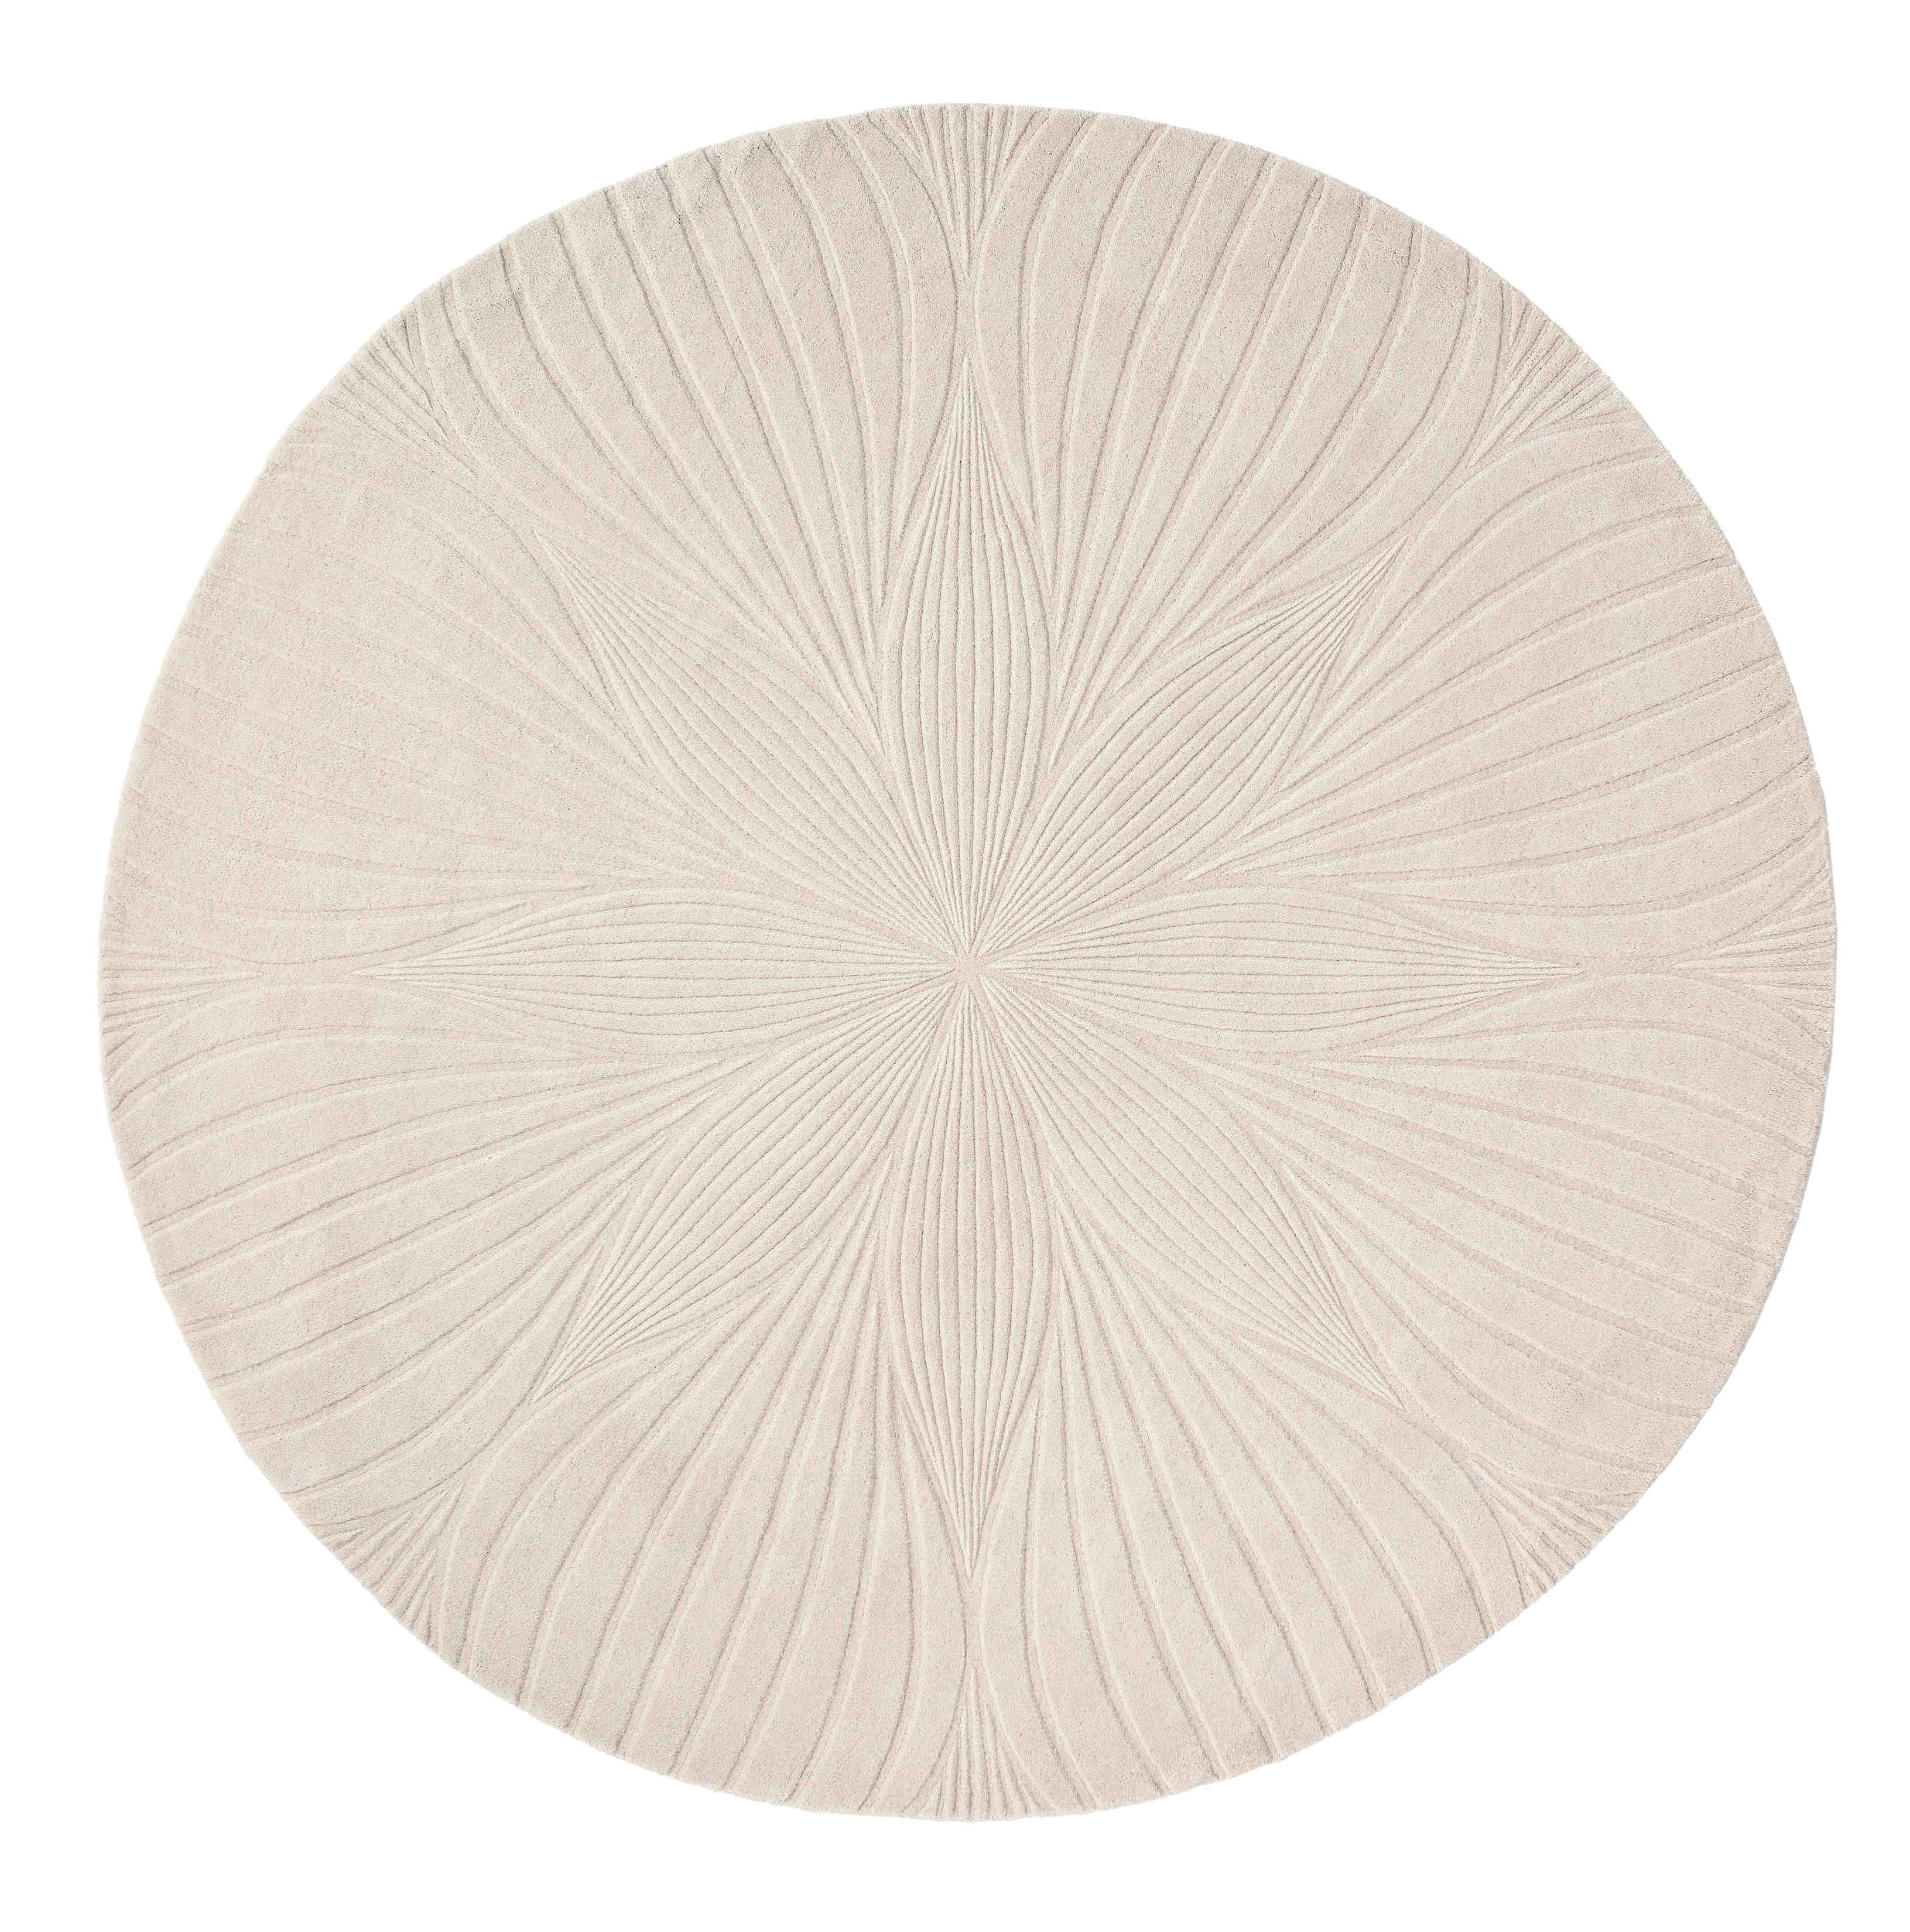 Round beige rug with engraved floral botanical pattern